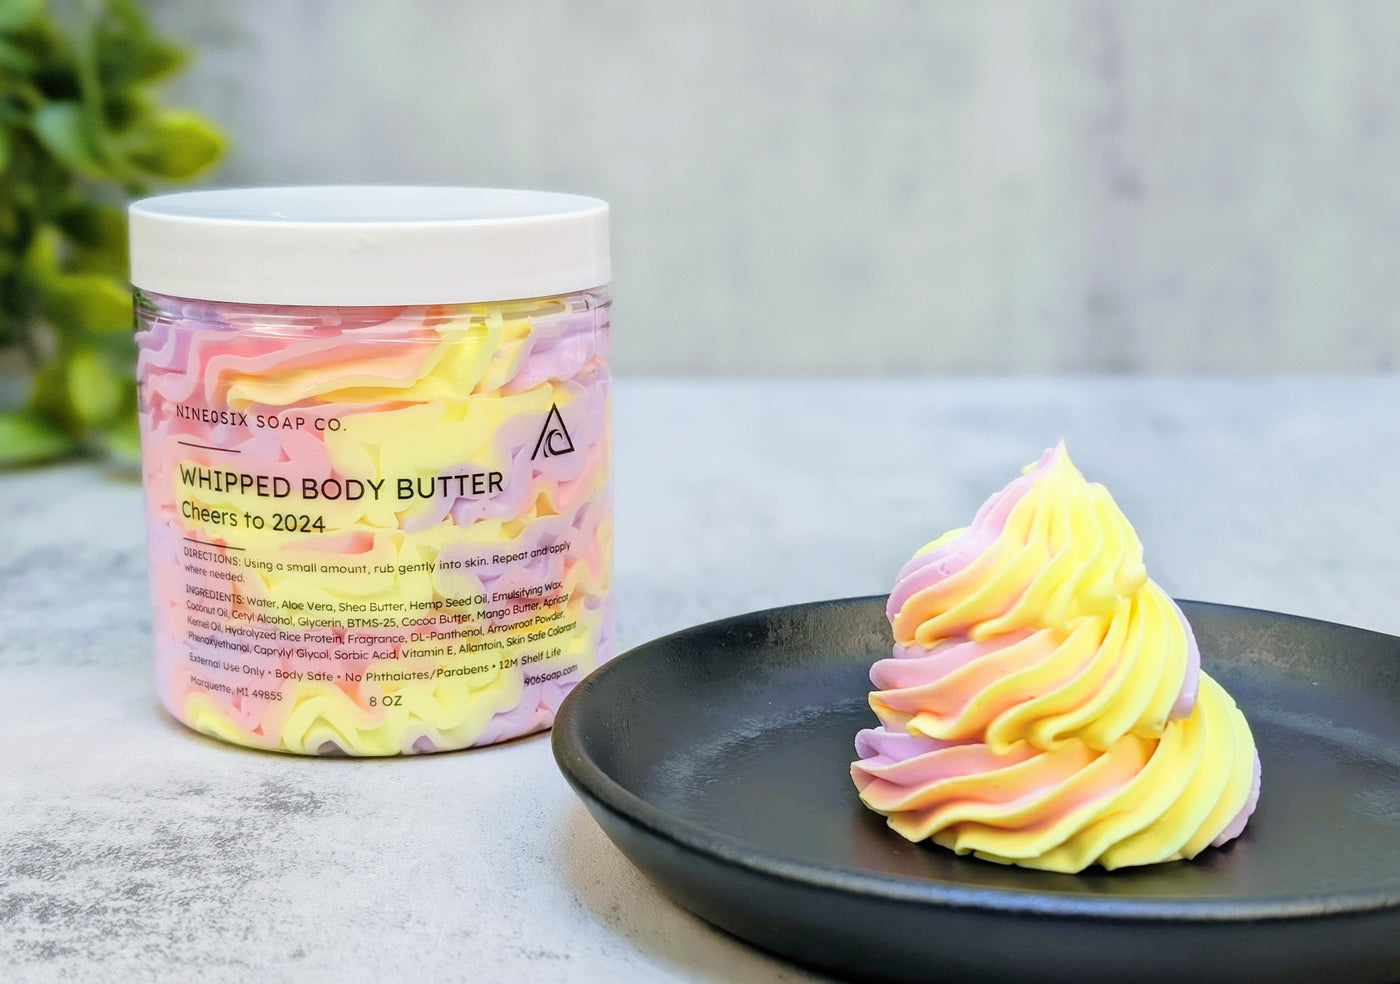 Whipped Body Butter - Cheers to 2024